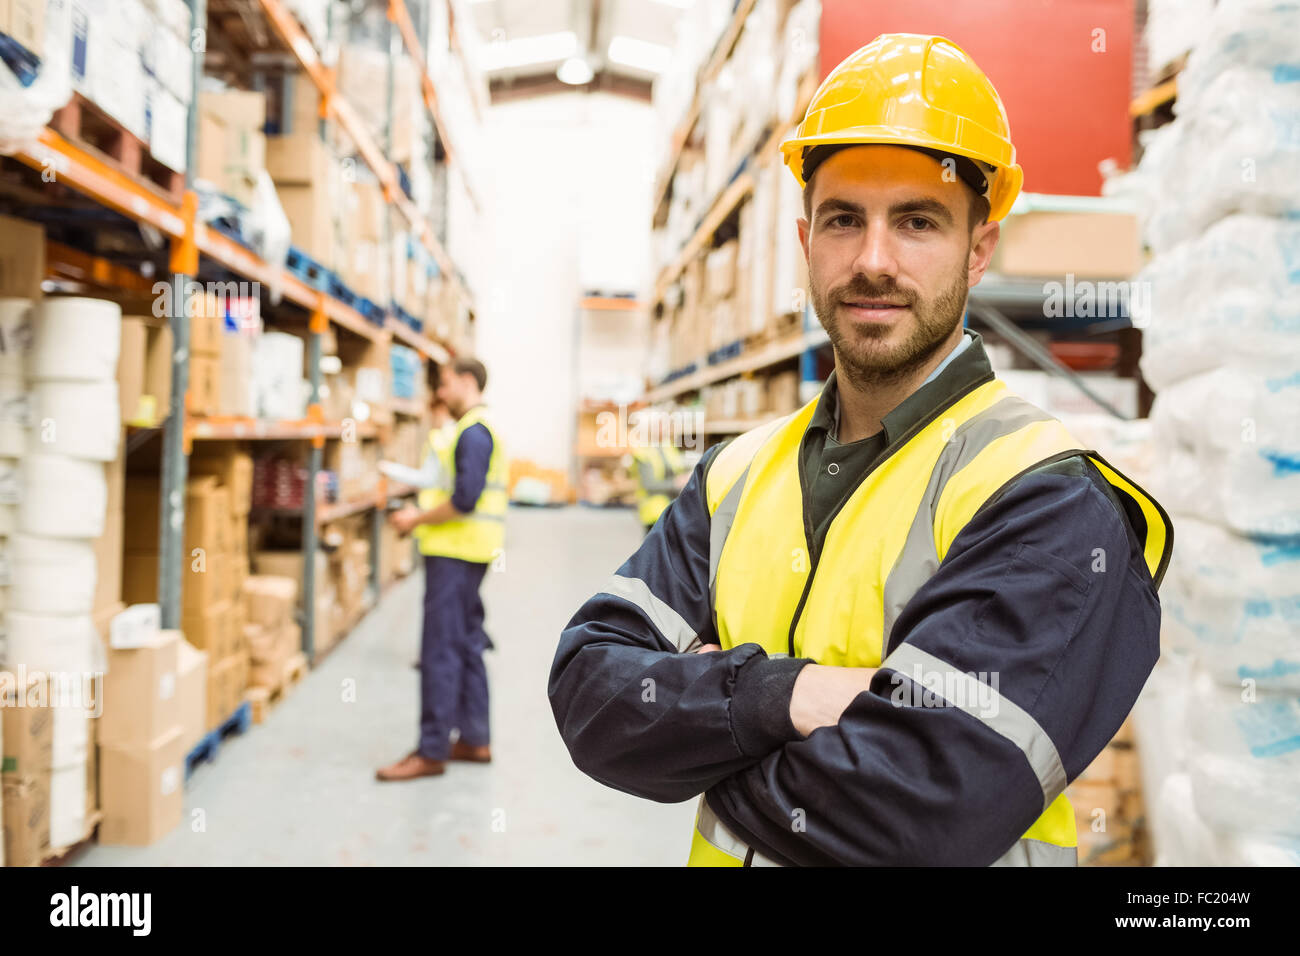 Smiling worker wearing yellow vest with arms crossed Stock Photo